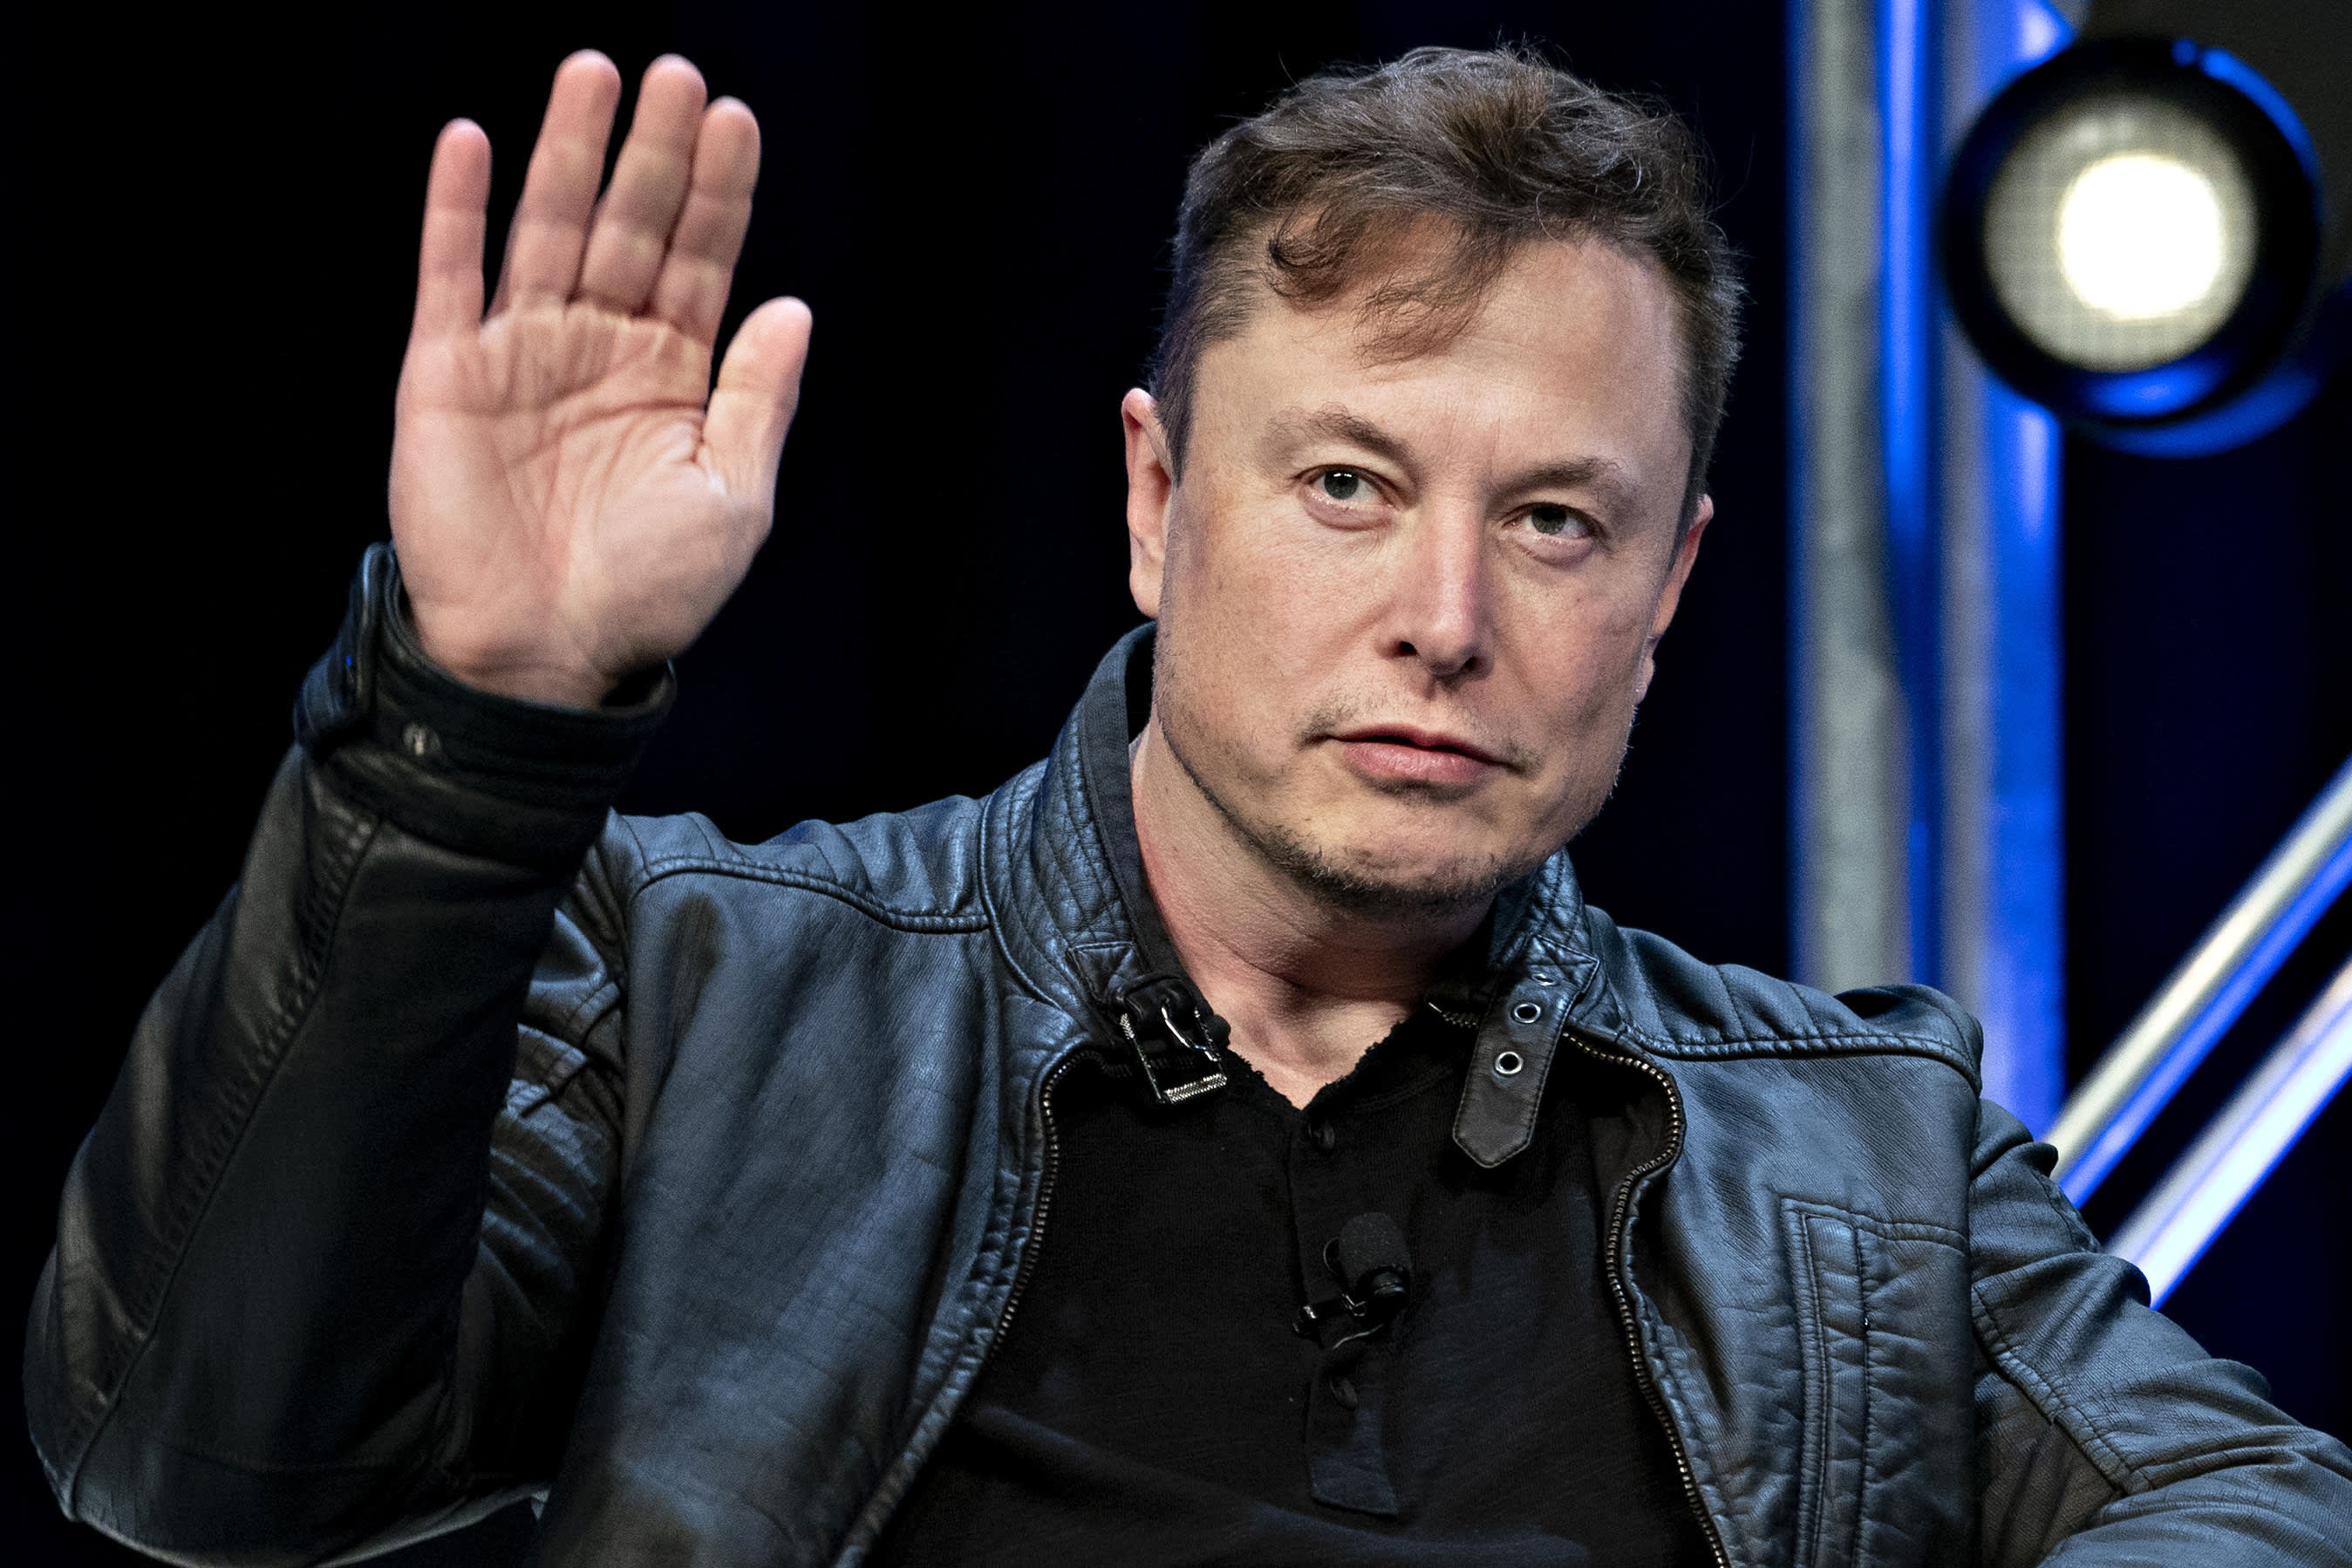 Tesla buys $ 1.5 billion in bitcoin – what could happen next